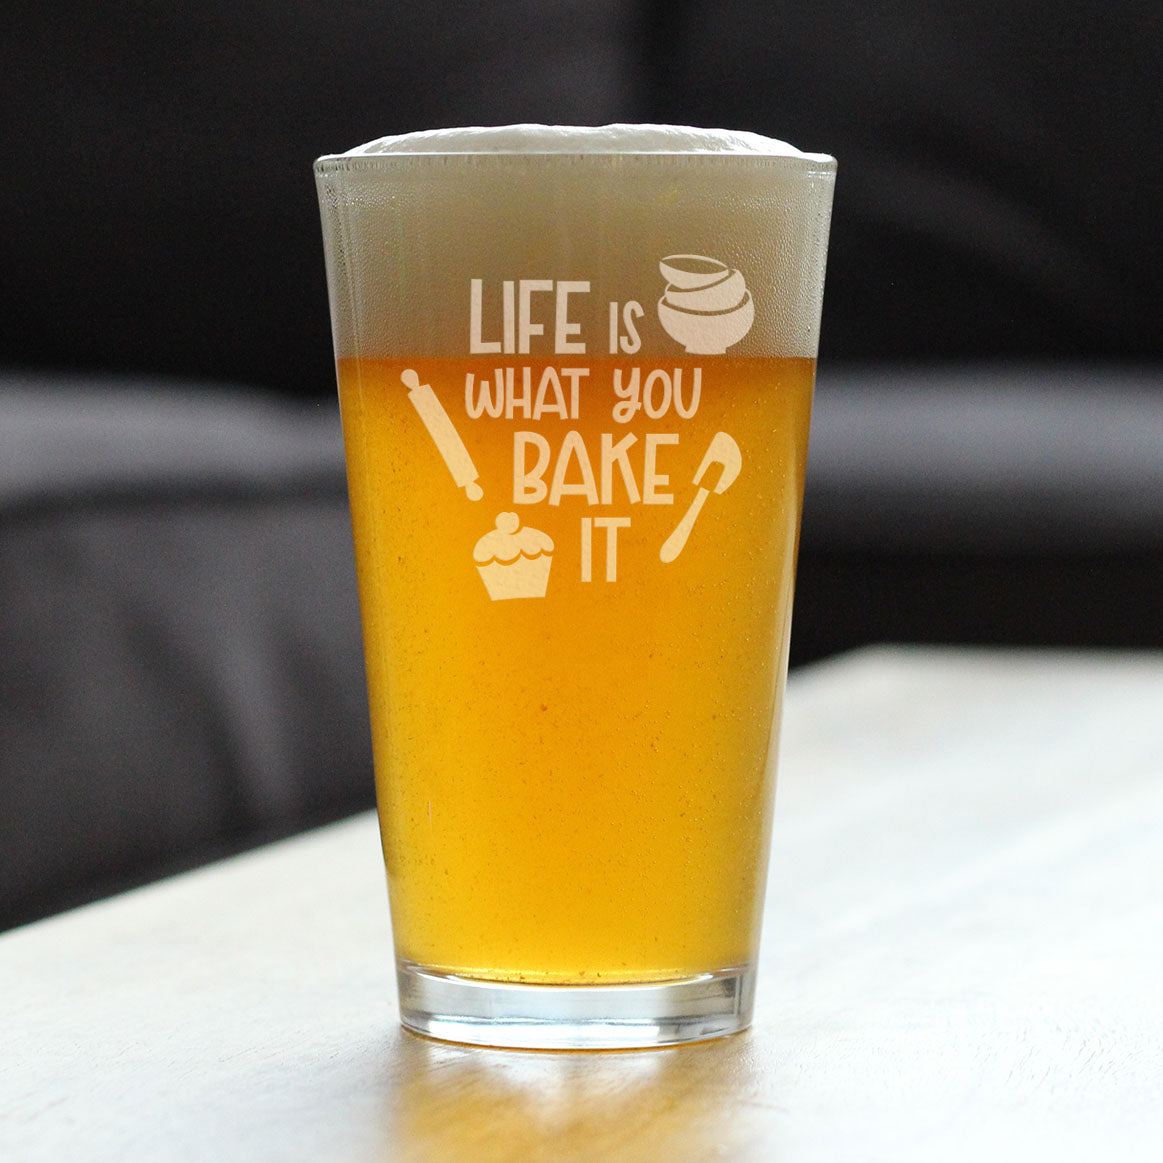 Life Is What You Bake It - Pint Glass for Beer - Funny Baking Themed Decor and Gifts for Bakers - 16 oz Glasses